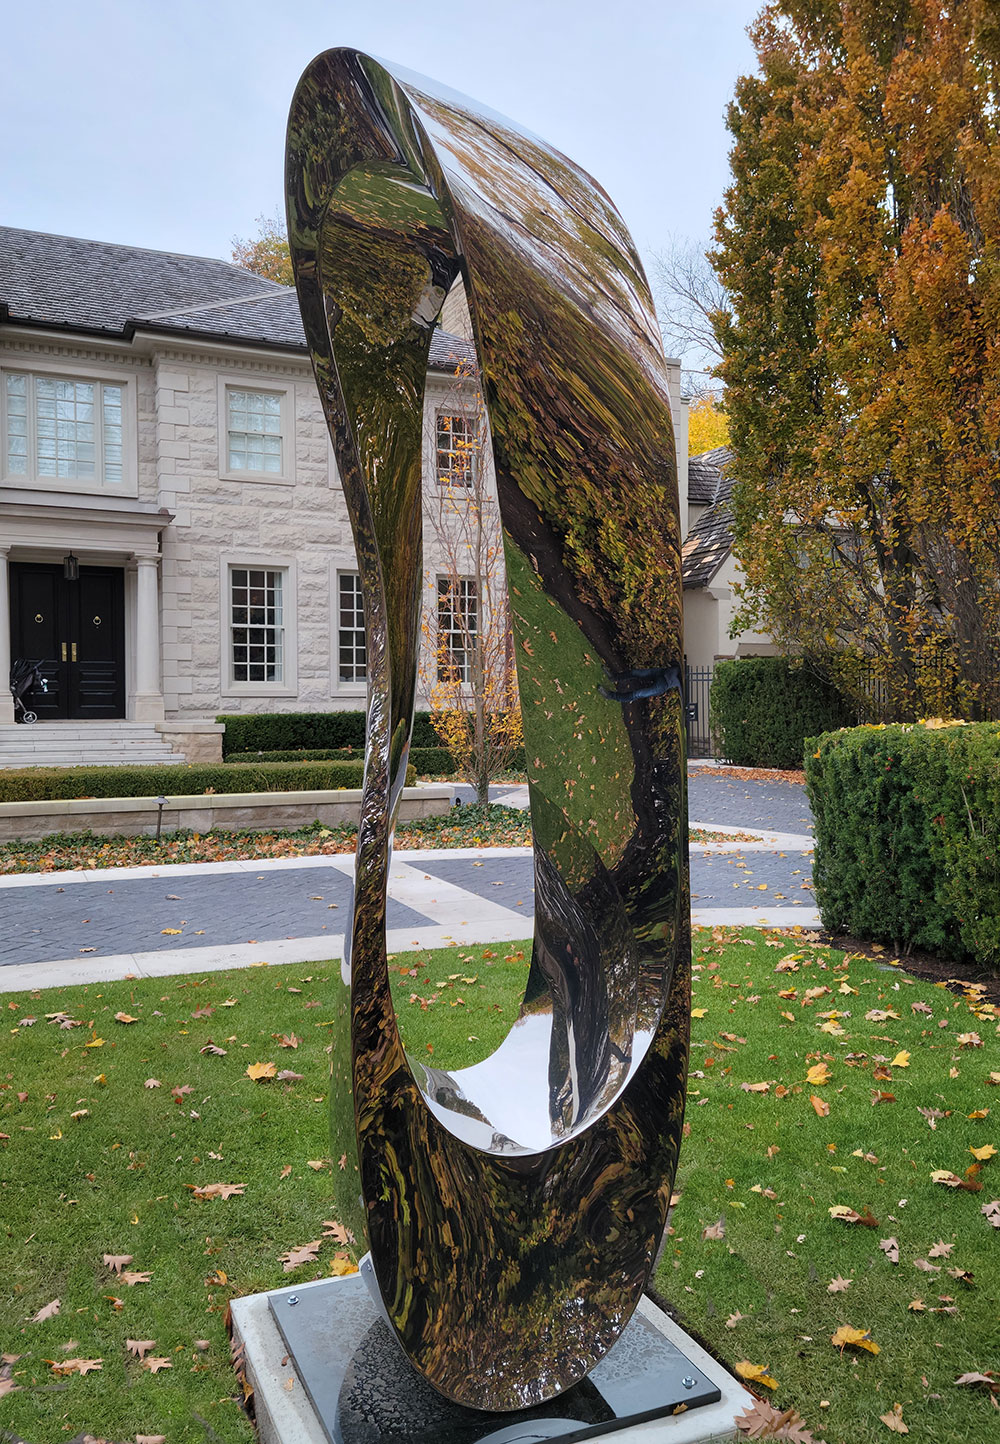 Jeremy Guy’s newest series of Mobius sculptures in mirror-polished stainless steel 